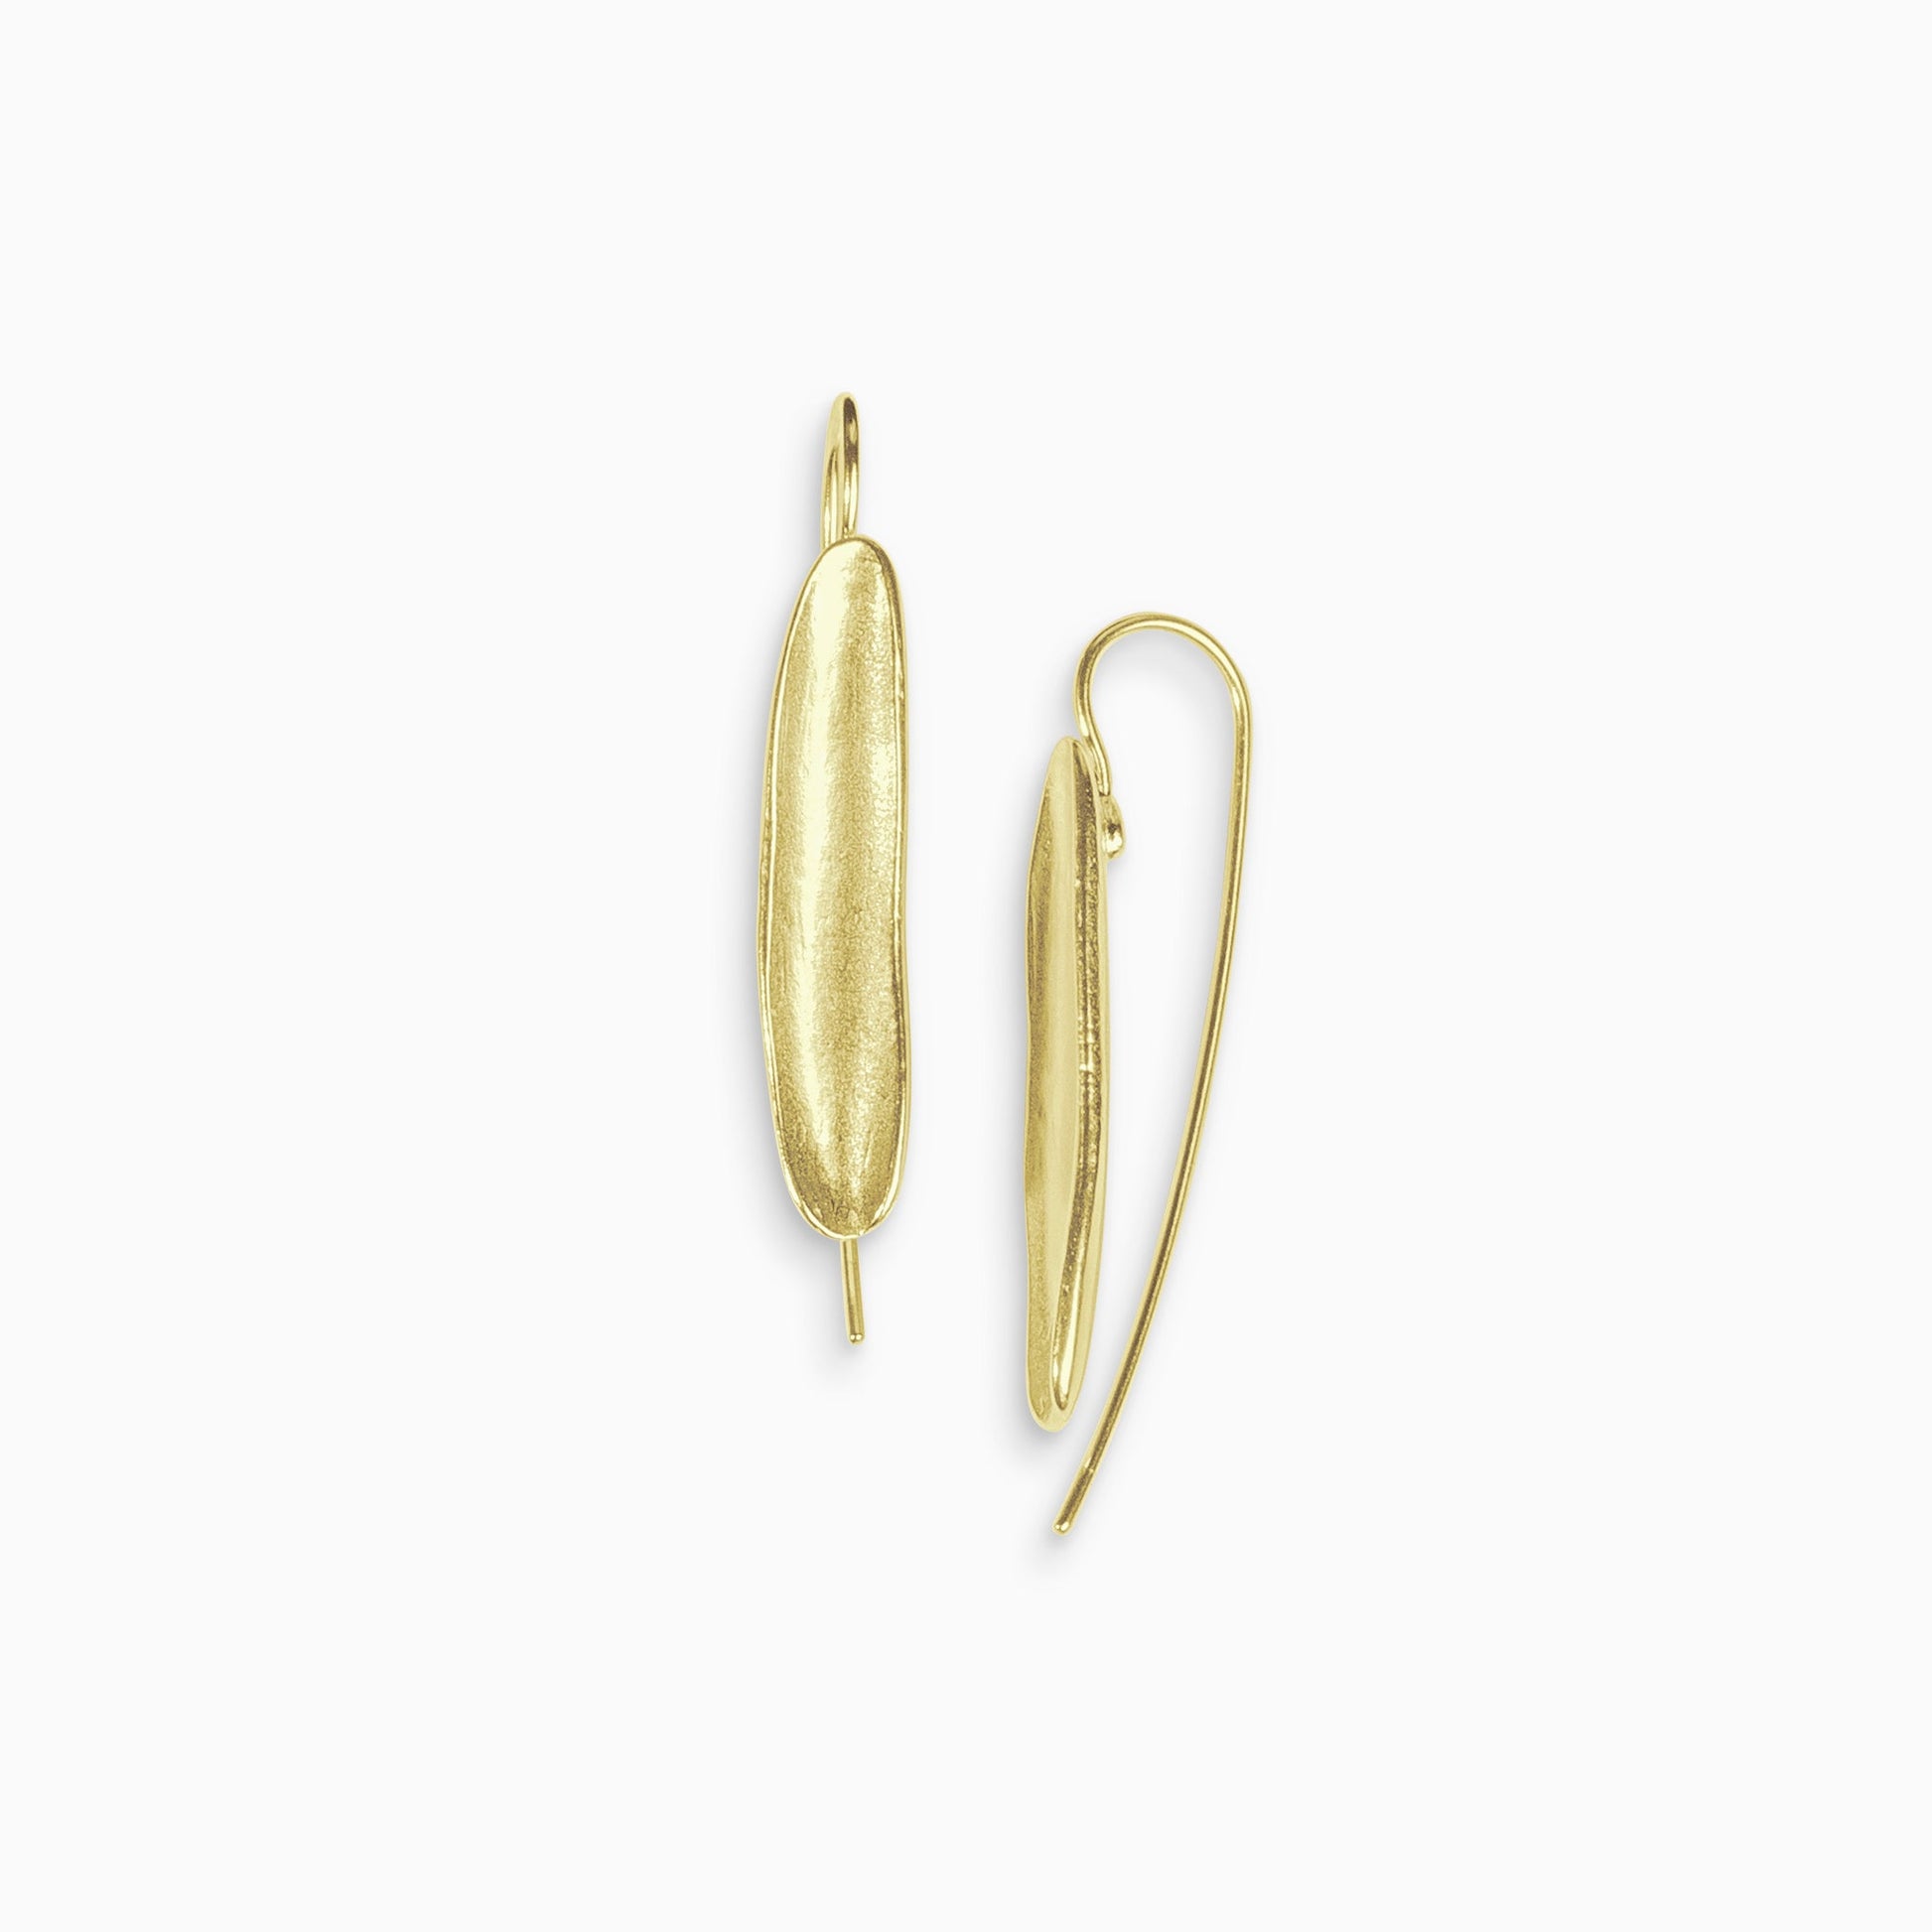 A pair of 18ct Fairtrade yellow gold concave long oval shaped earrings with a hook fastening. Satin finish. 35mm length, 6mm width